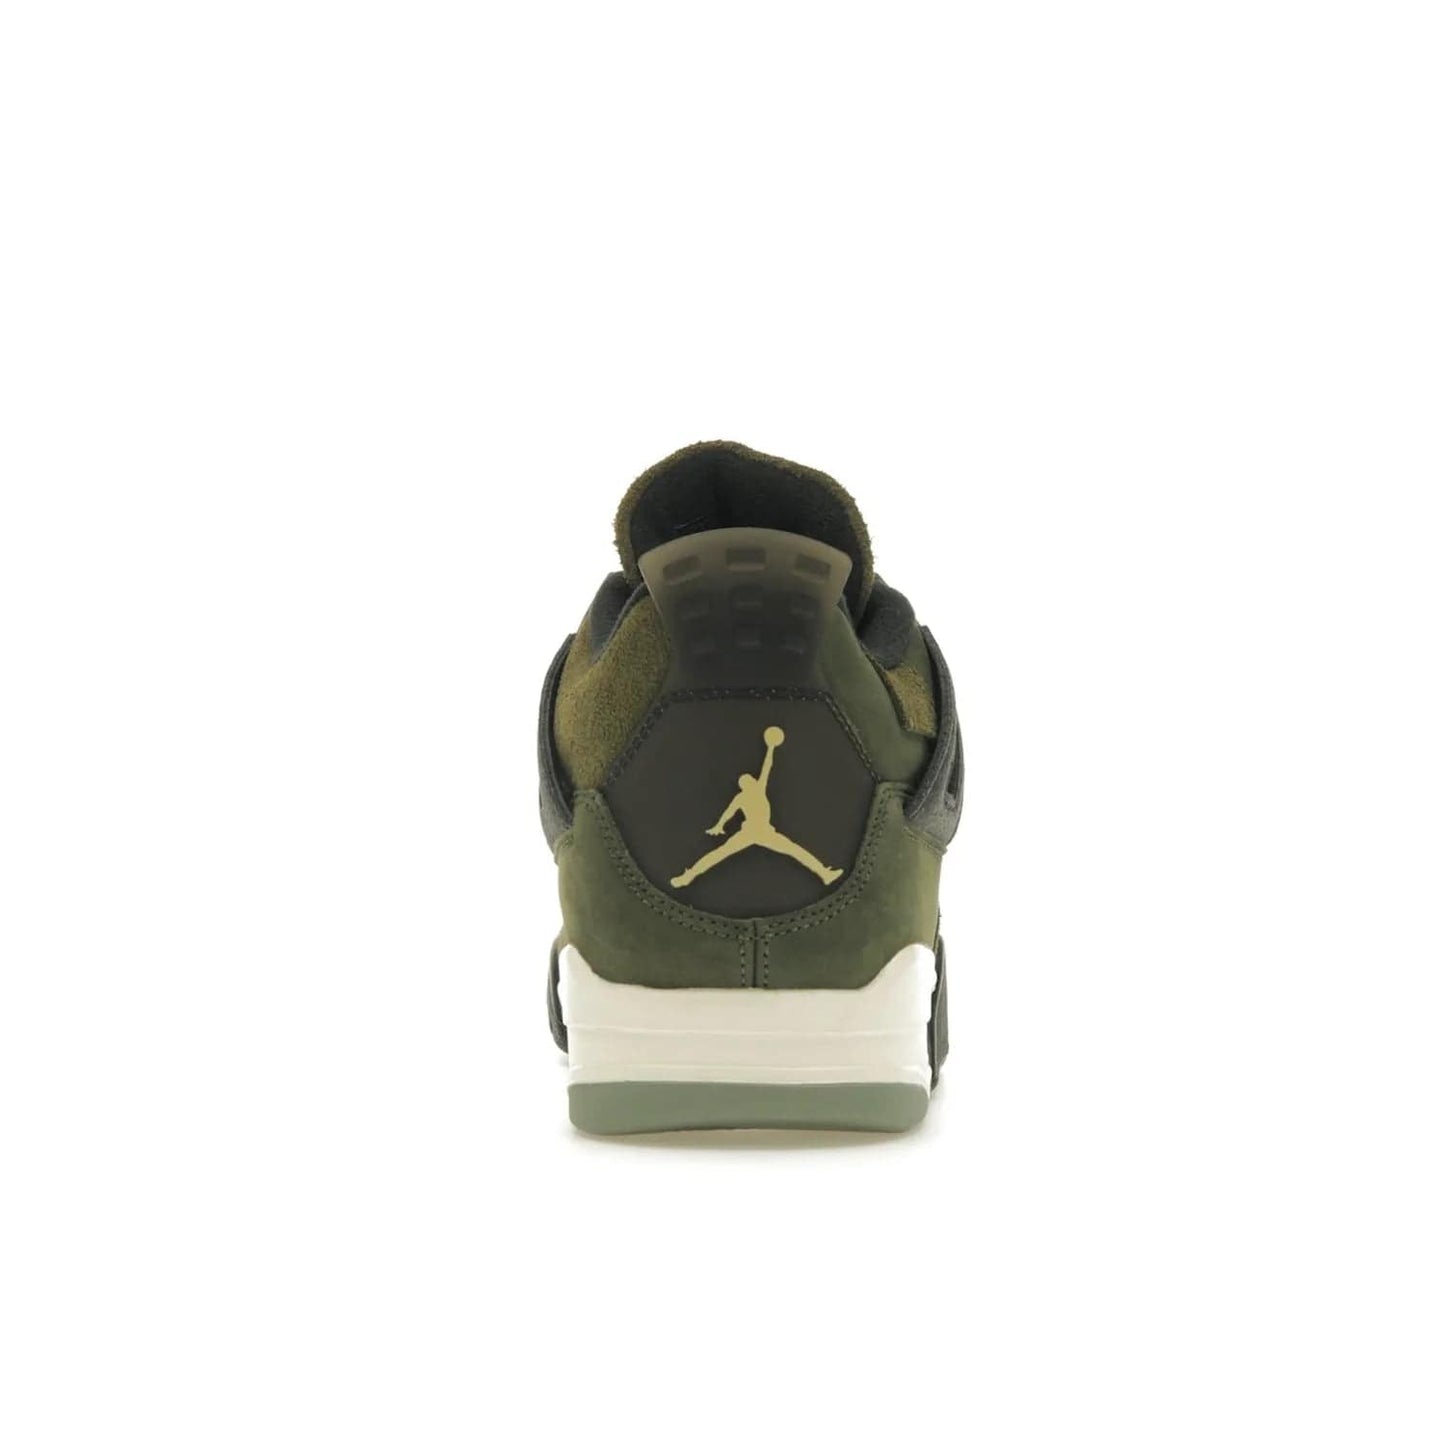 Jordan 4 Retro SE Craft Medium Olive - Image 28 - Only at www.BallersClubKickz.com - Grab the Jordan 4 Retro SE Crafts for a unique style. Combines Medium Olive, Pale Vanilla, Khaki, Black and Sail, with same classic shape, cushioning, and rubber outsole. Available on November 18th!